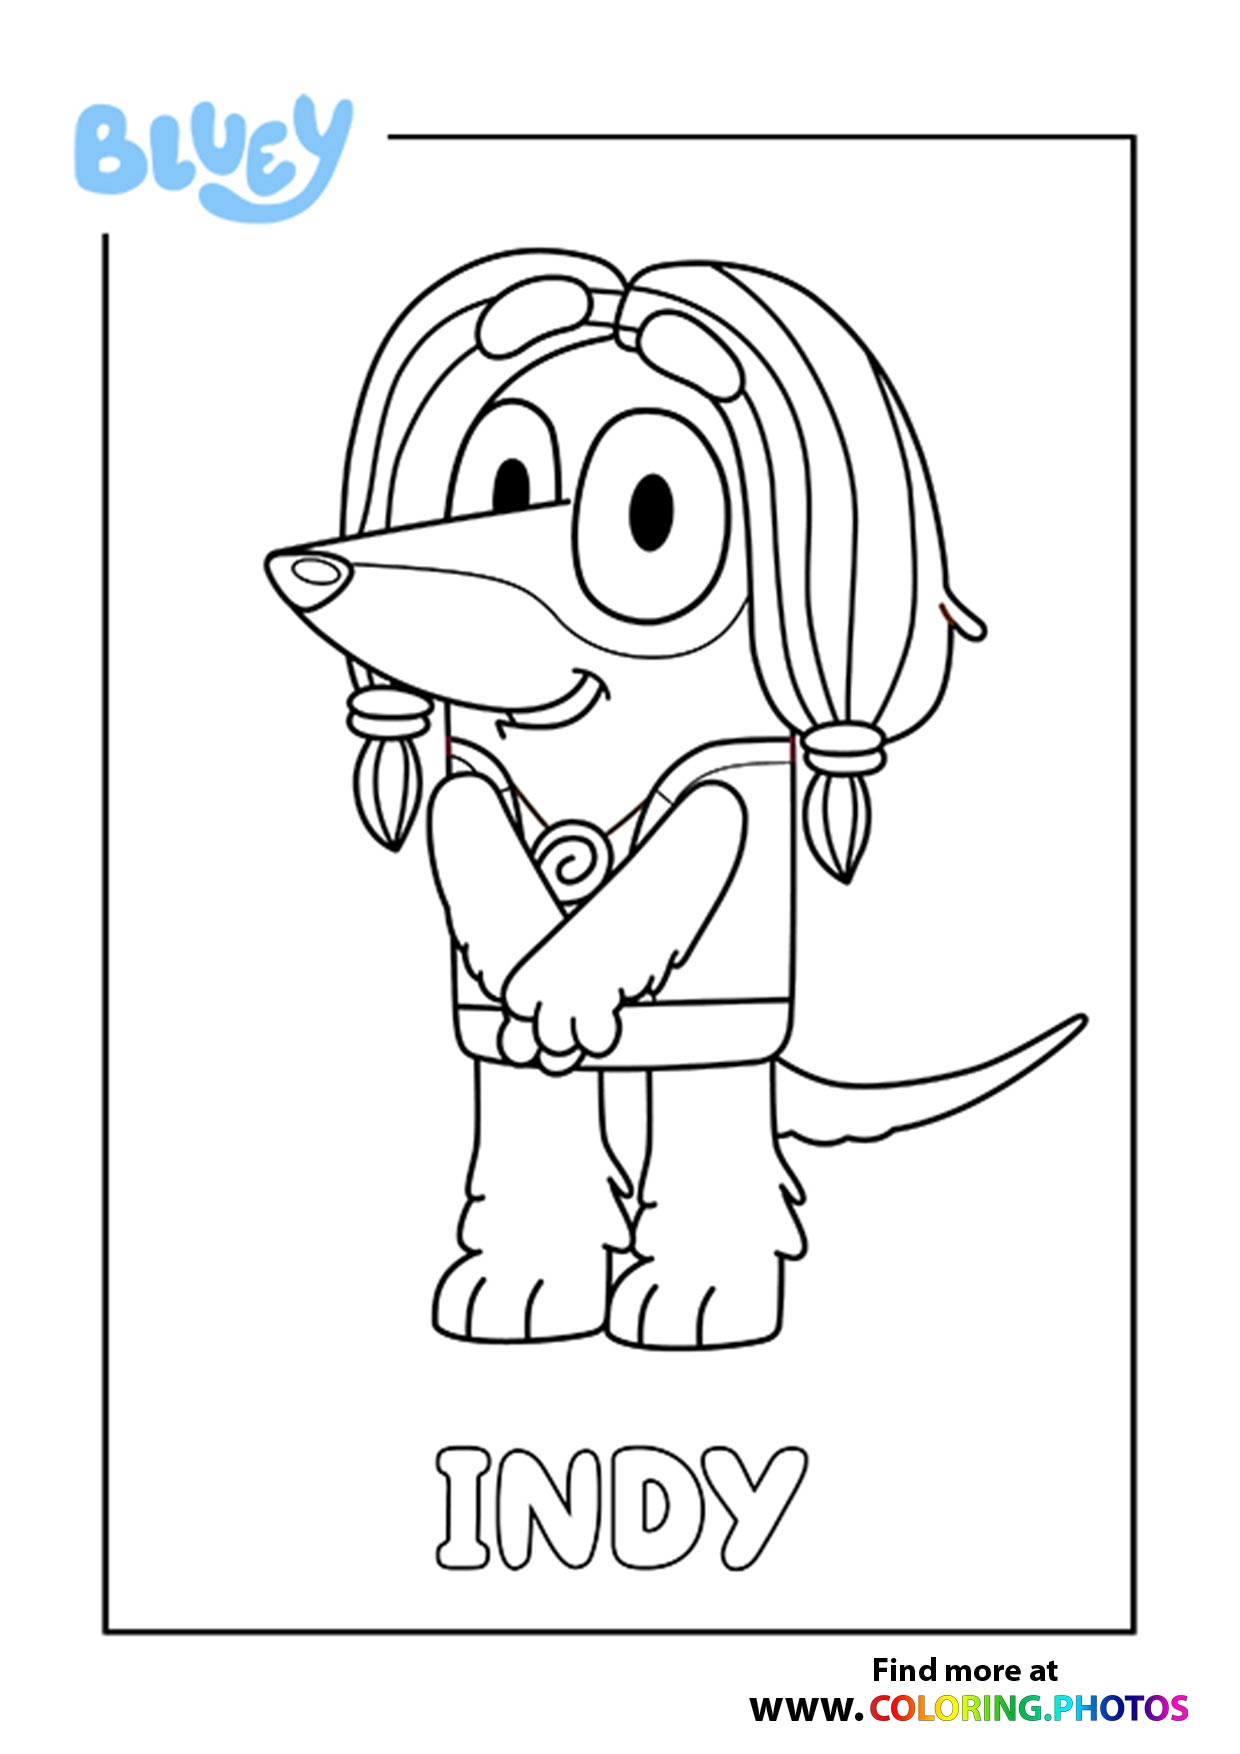 Bluey Chloe Coloring Pages for kids